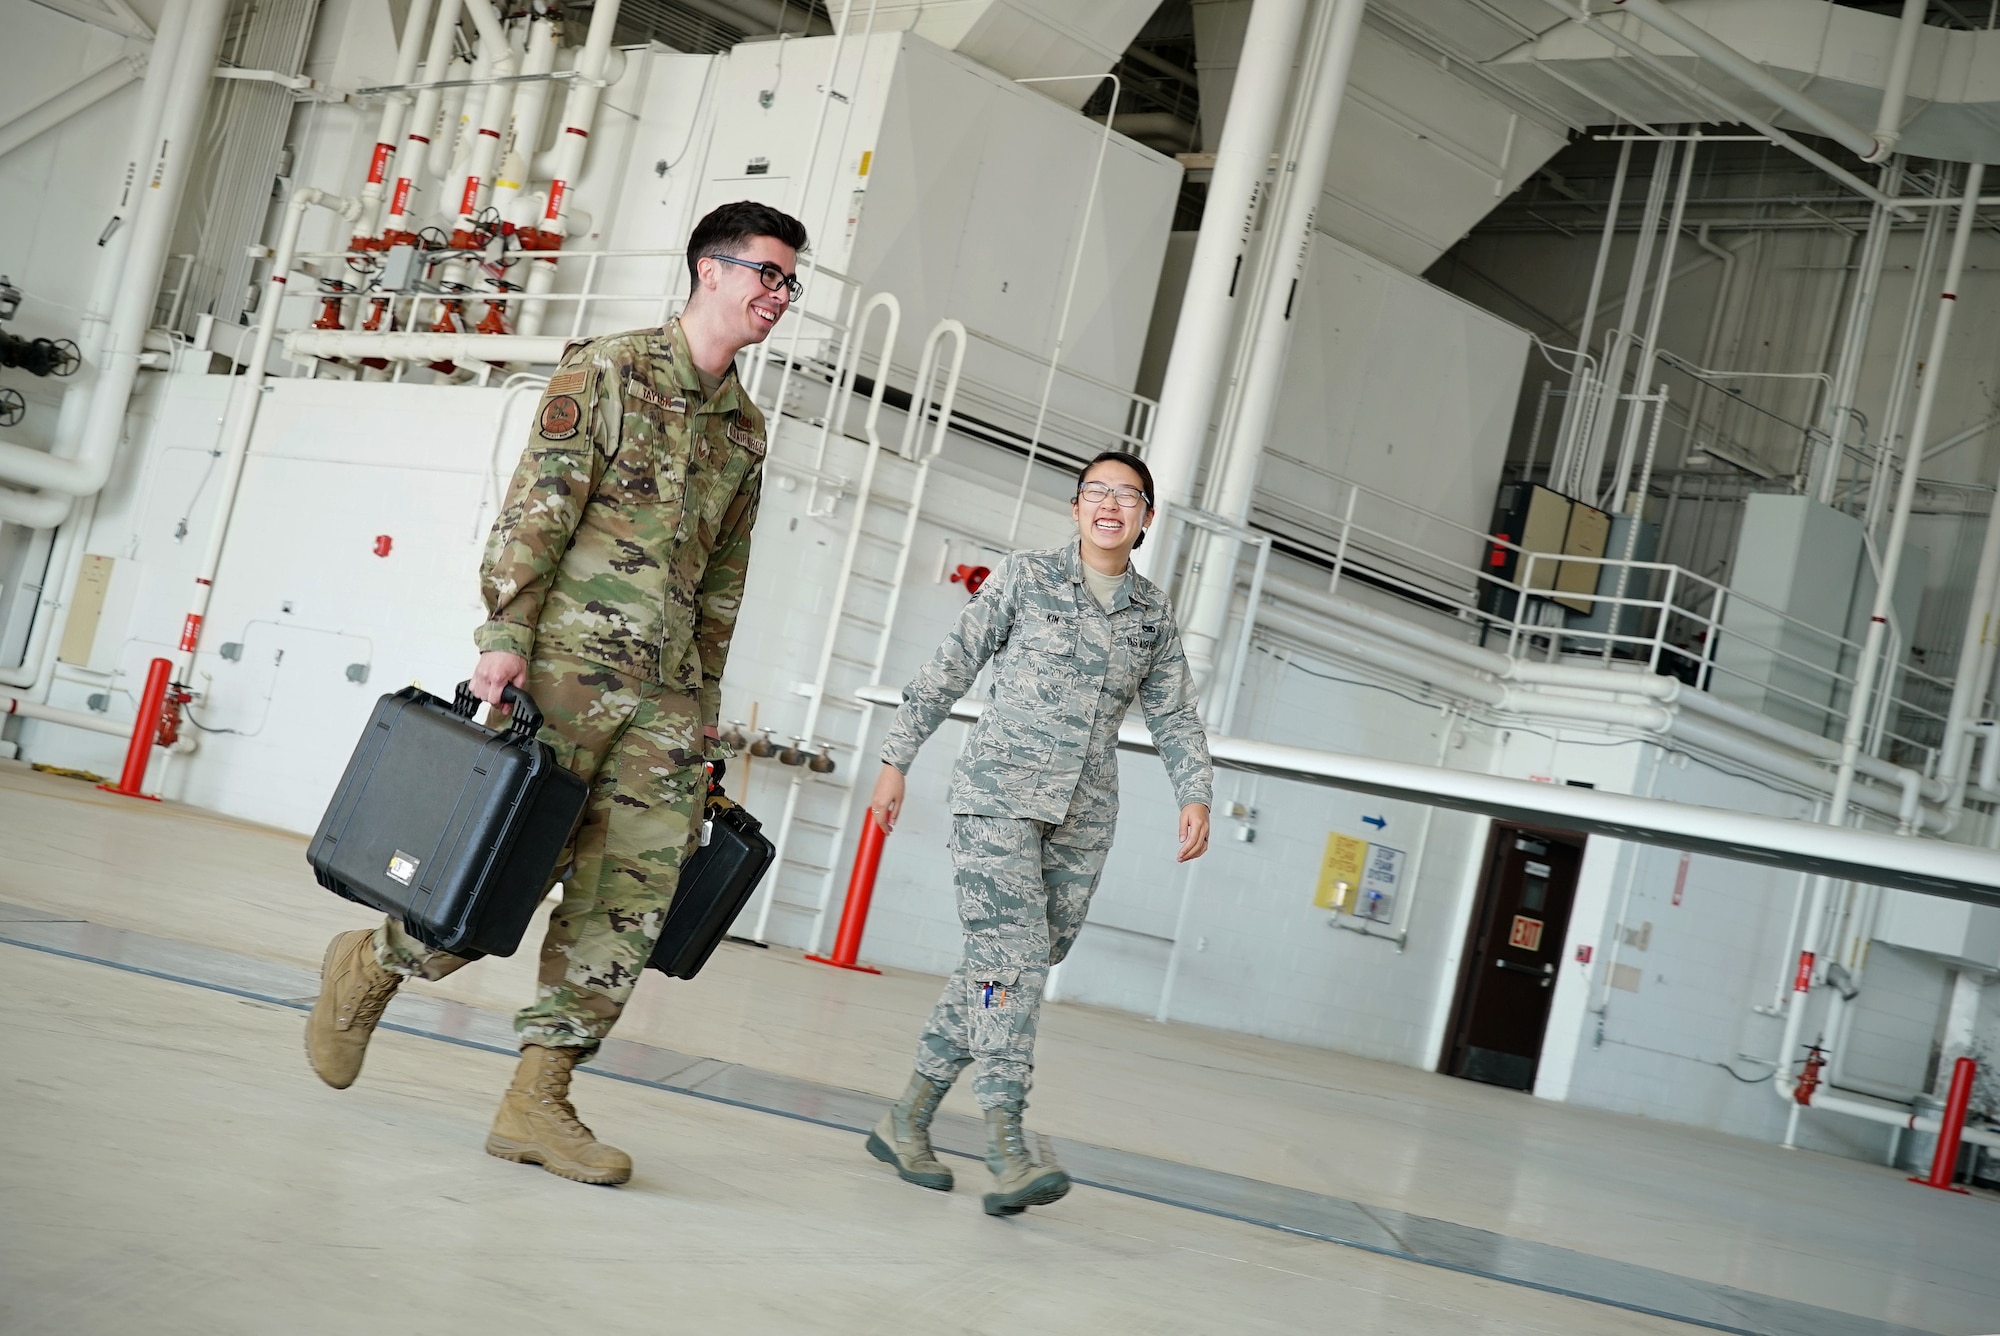 A military-uniformed man and woman walk through a large aircraft hangar next to each other as they smile in conversation.